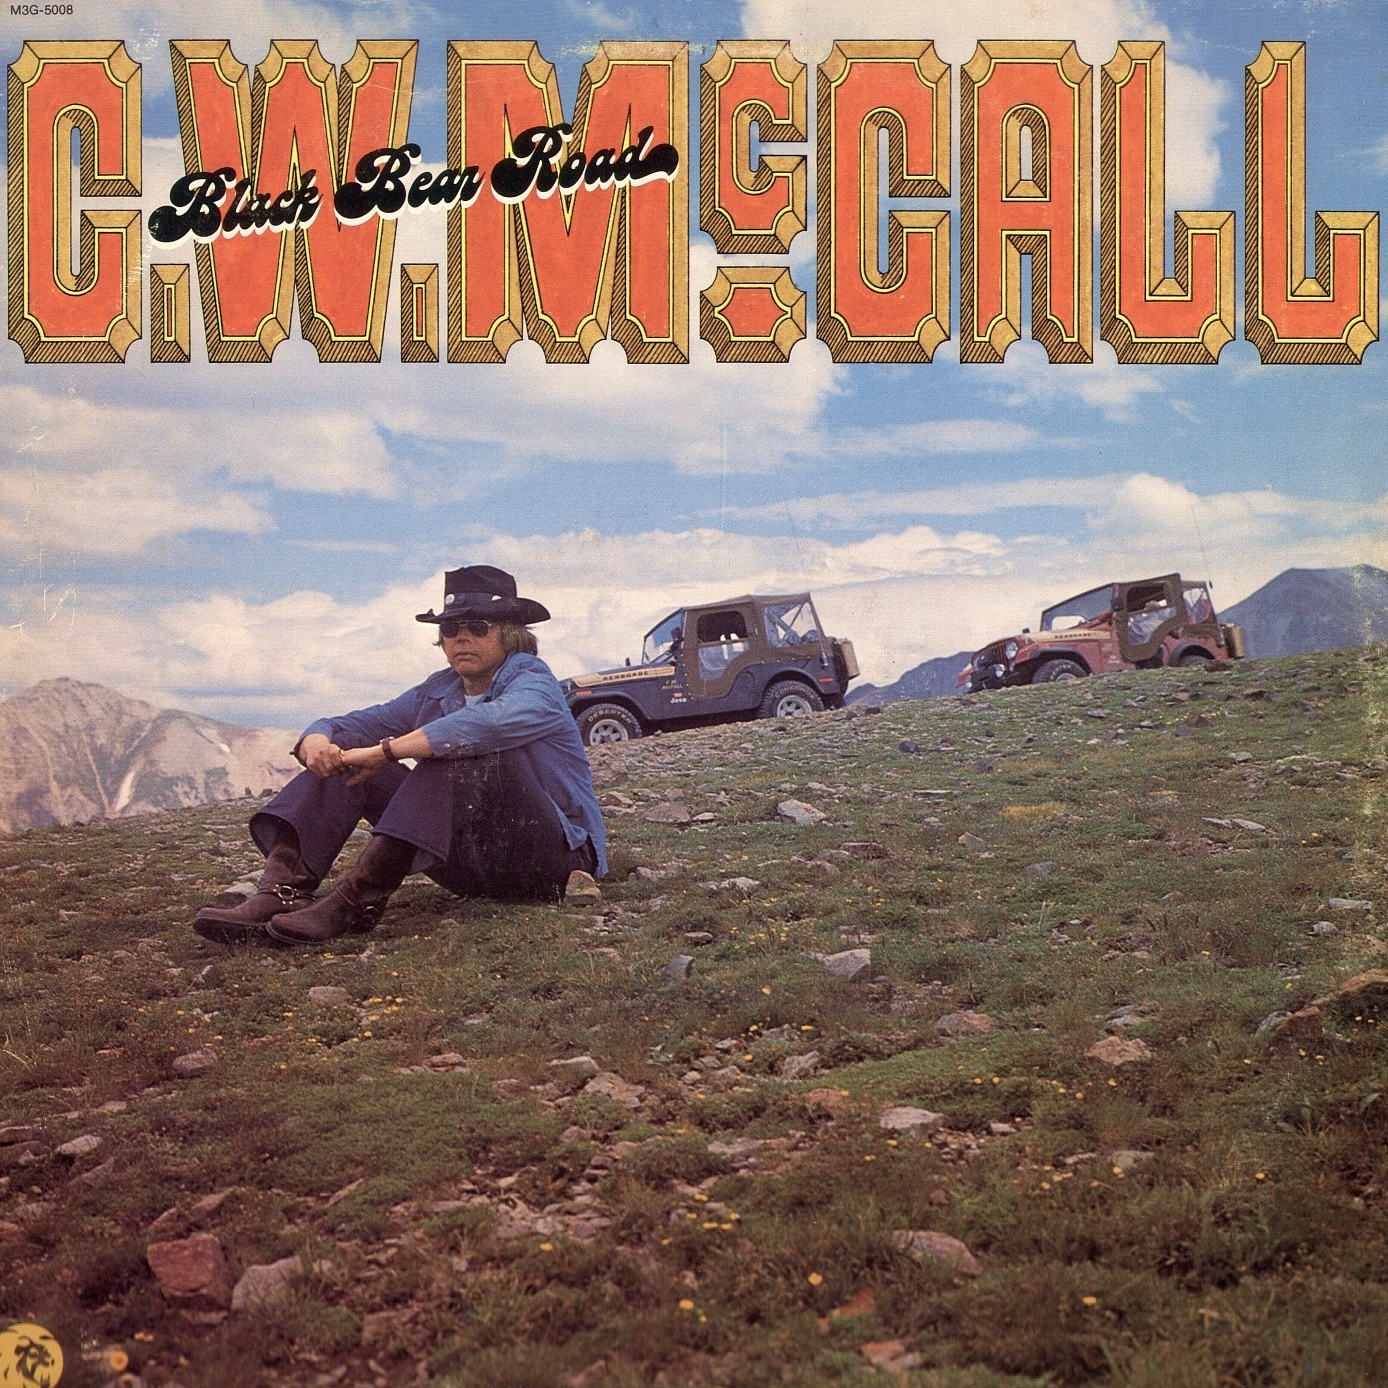 Black Bear Road 1975 Country C.W. Mccall Download